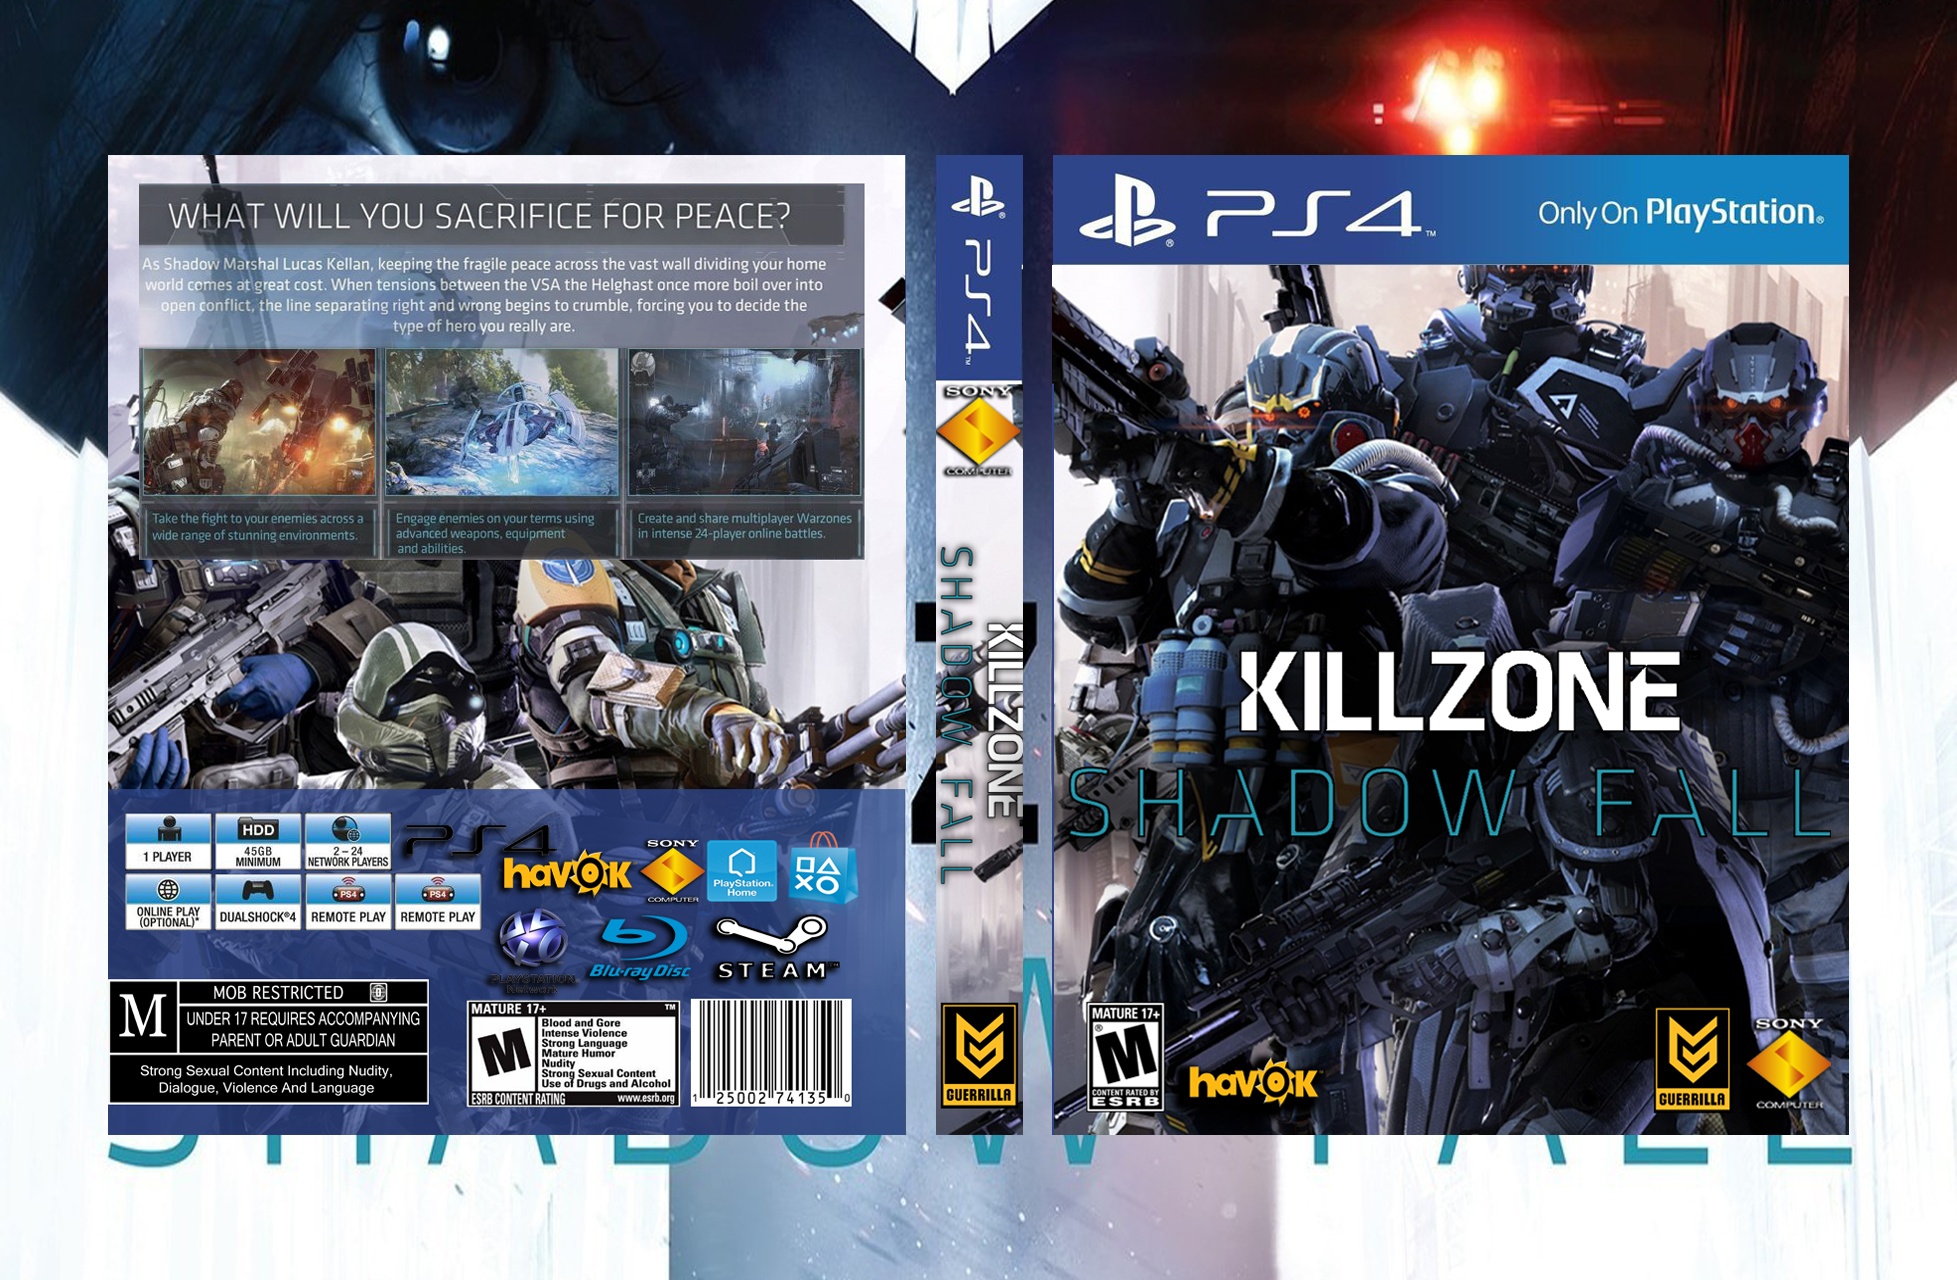 As requested, here are the custom printable game covers! PS4